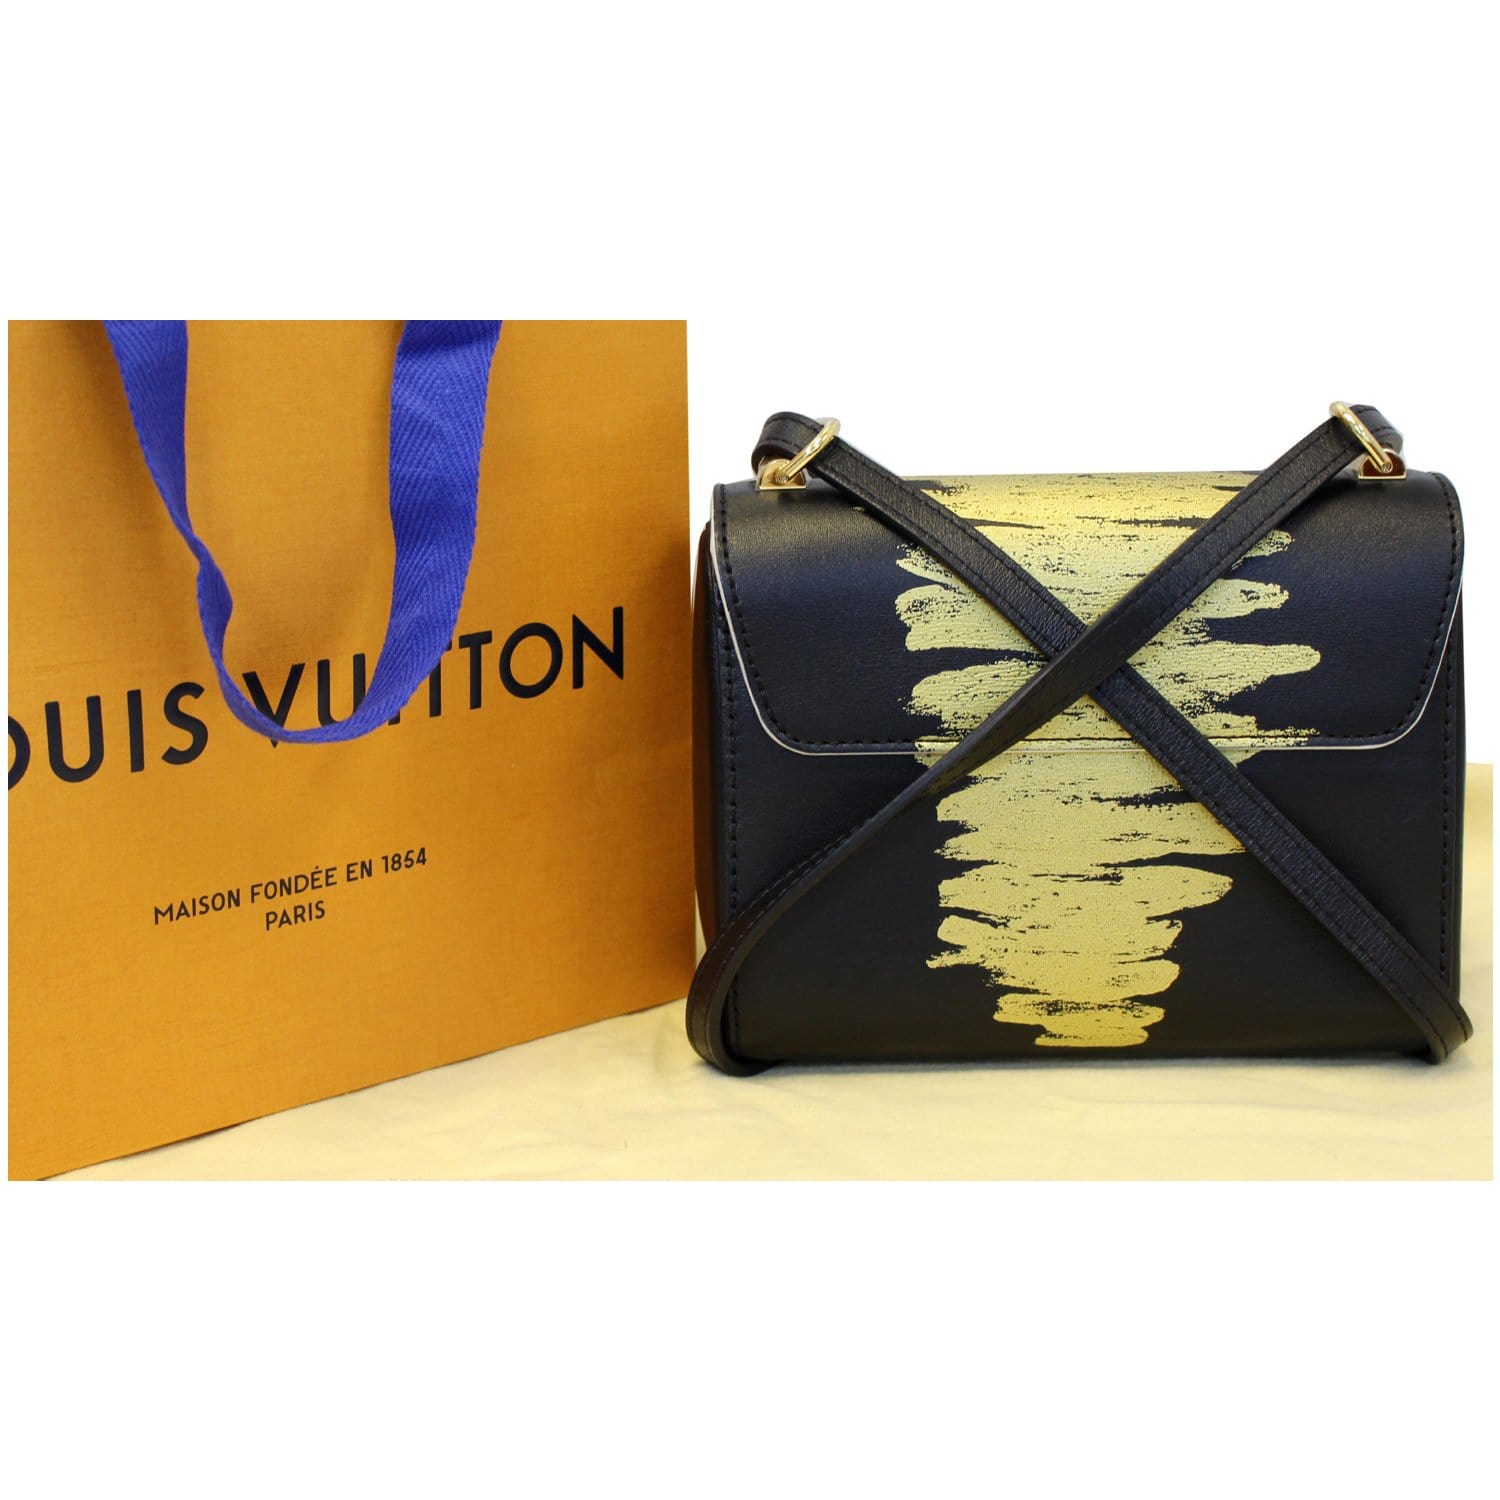 Products by Louis Vuitton: Twist PM